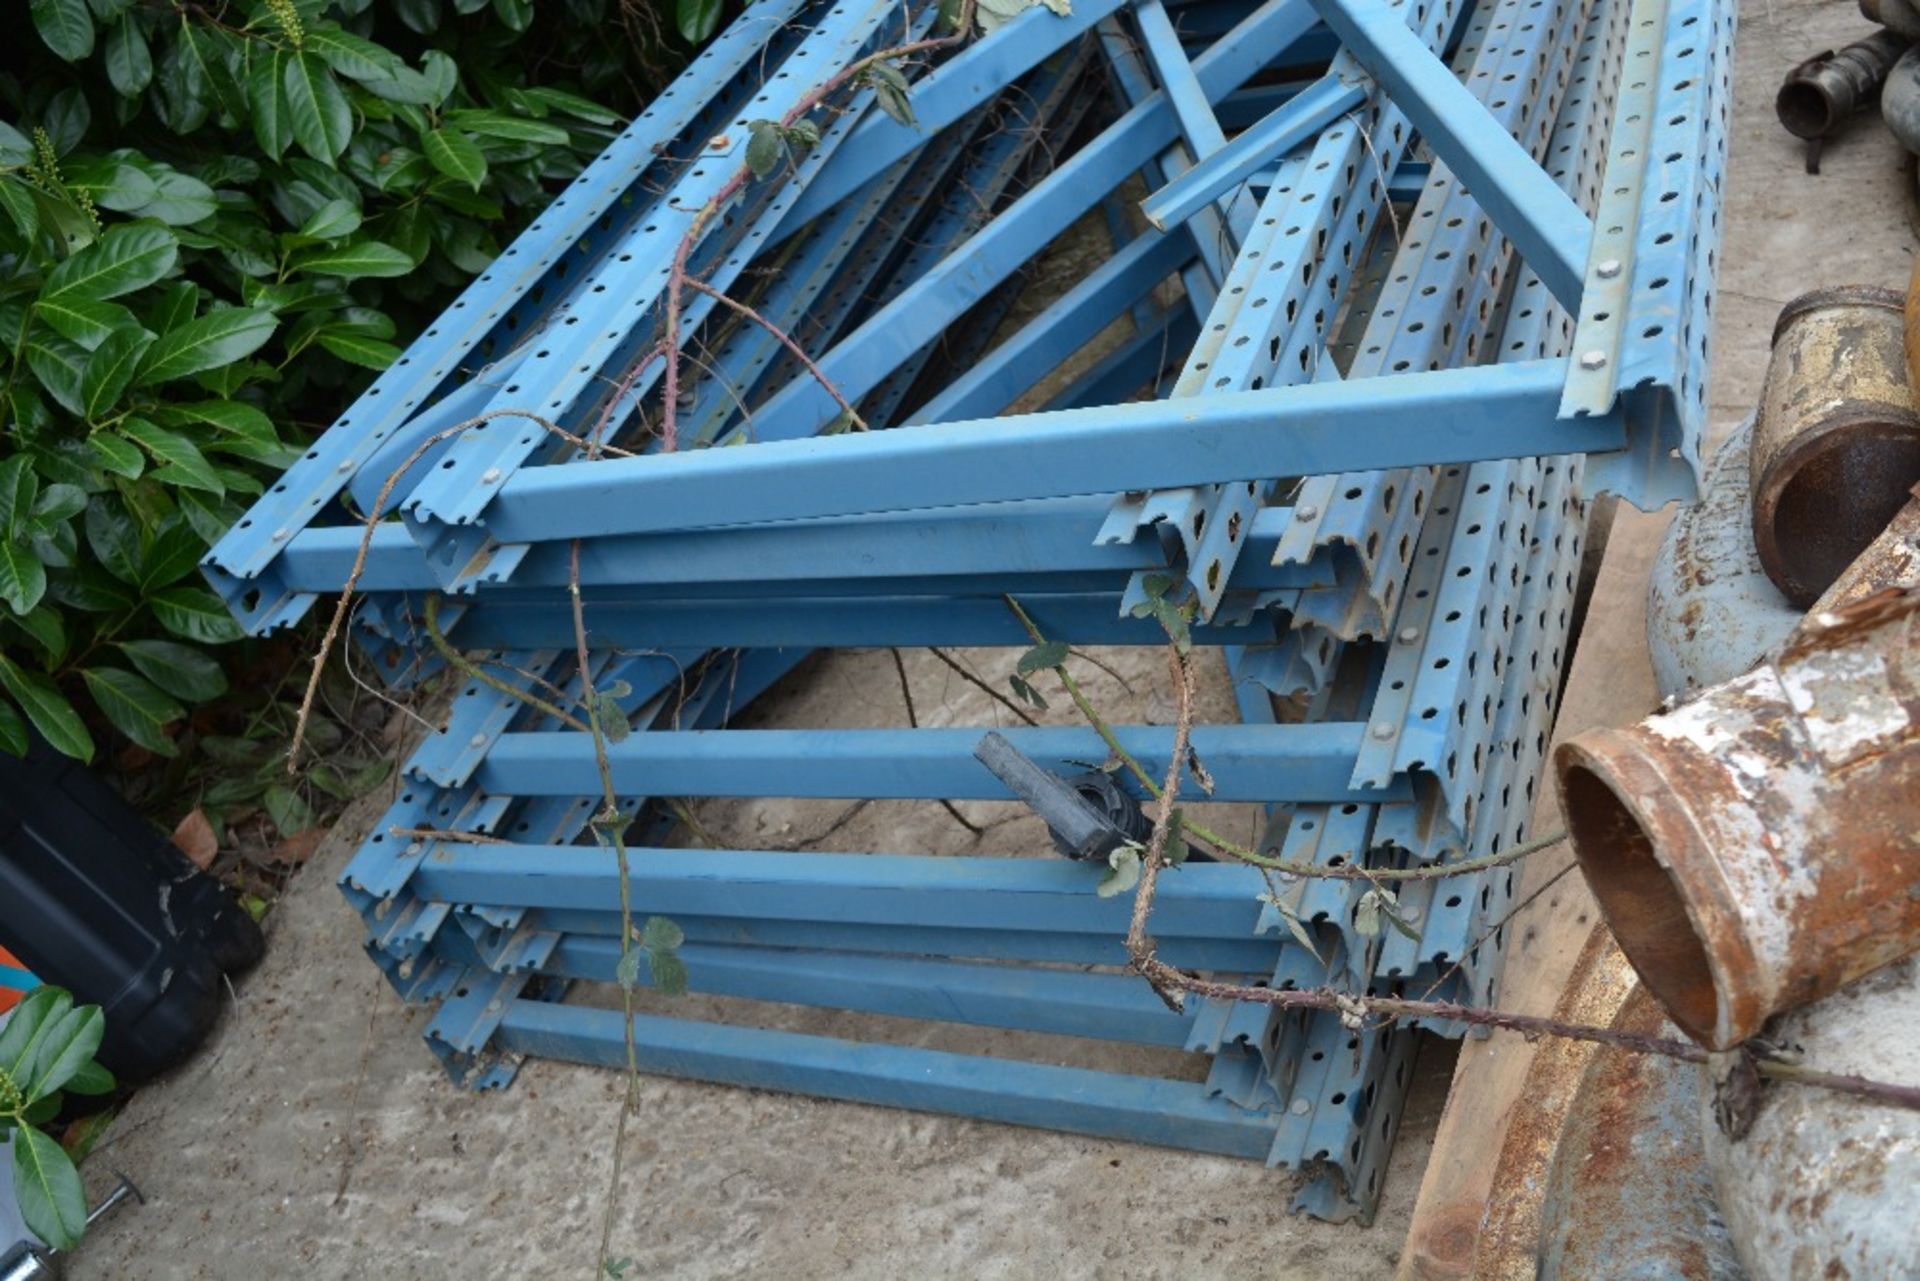 DEXIAN STYLE RACKING, 6M UPRIGHTS (9 OF), 2.7M CROSS BEAMS (APPROX. 40 OF.), SOME DAMAGED, ID: PL- - Image 3 of 11